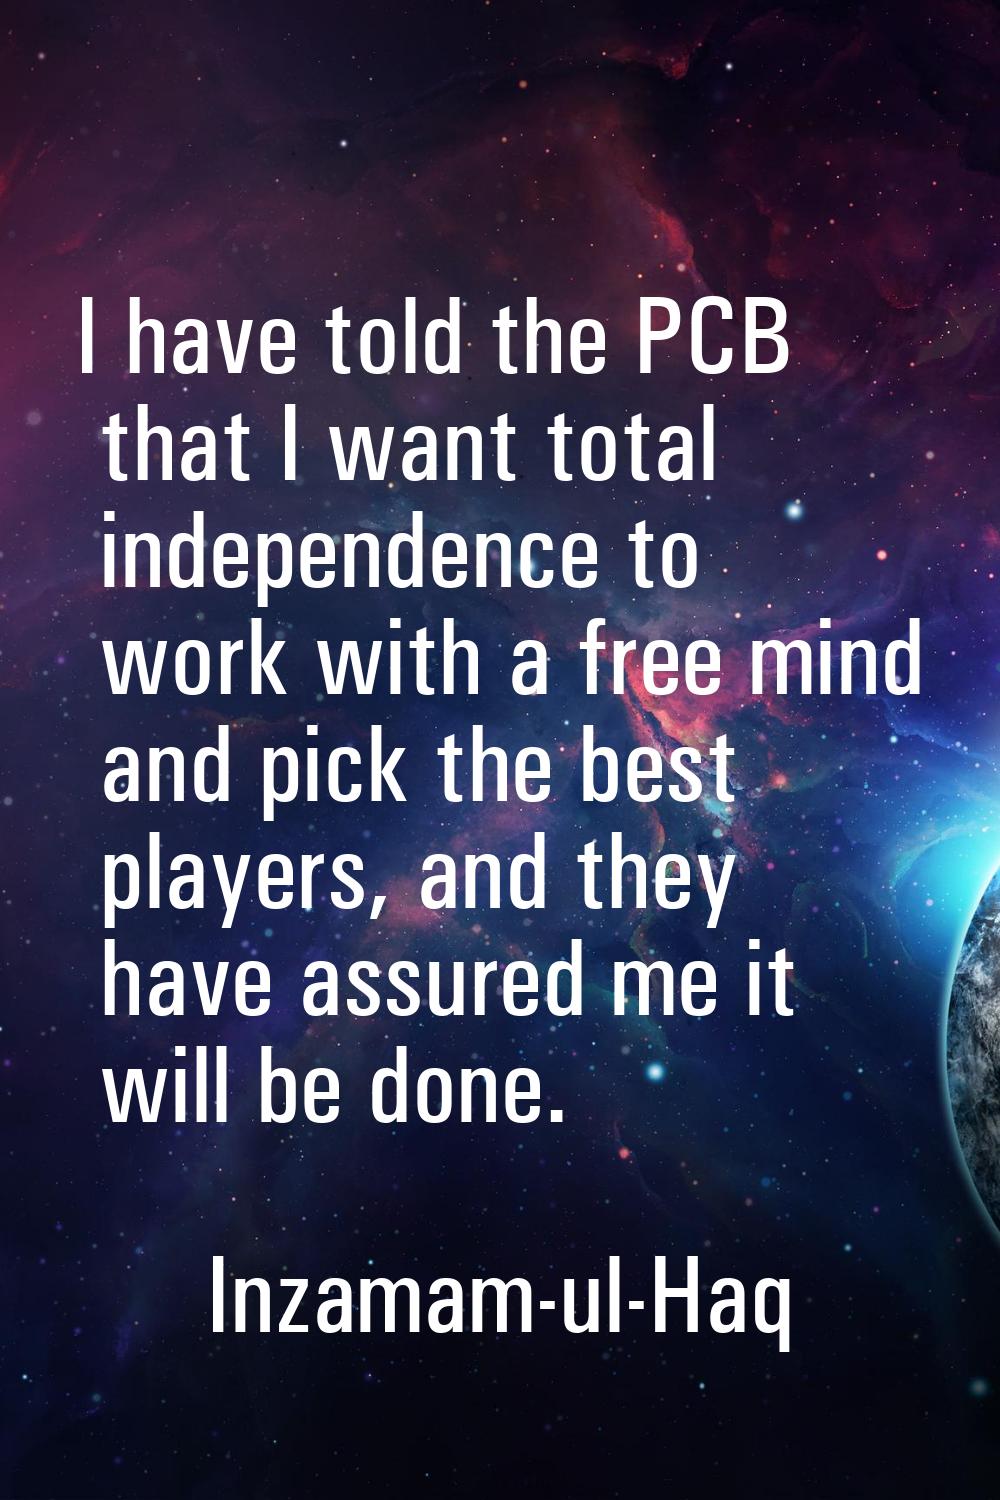 I have told the PCB that I want total independence to work with a free mind and pick the best playe